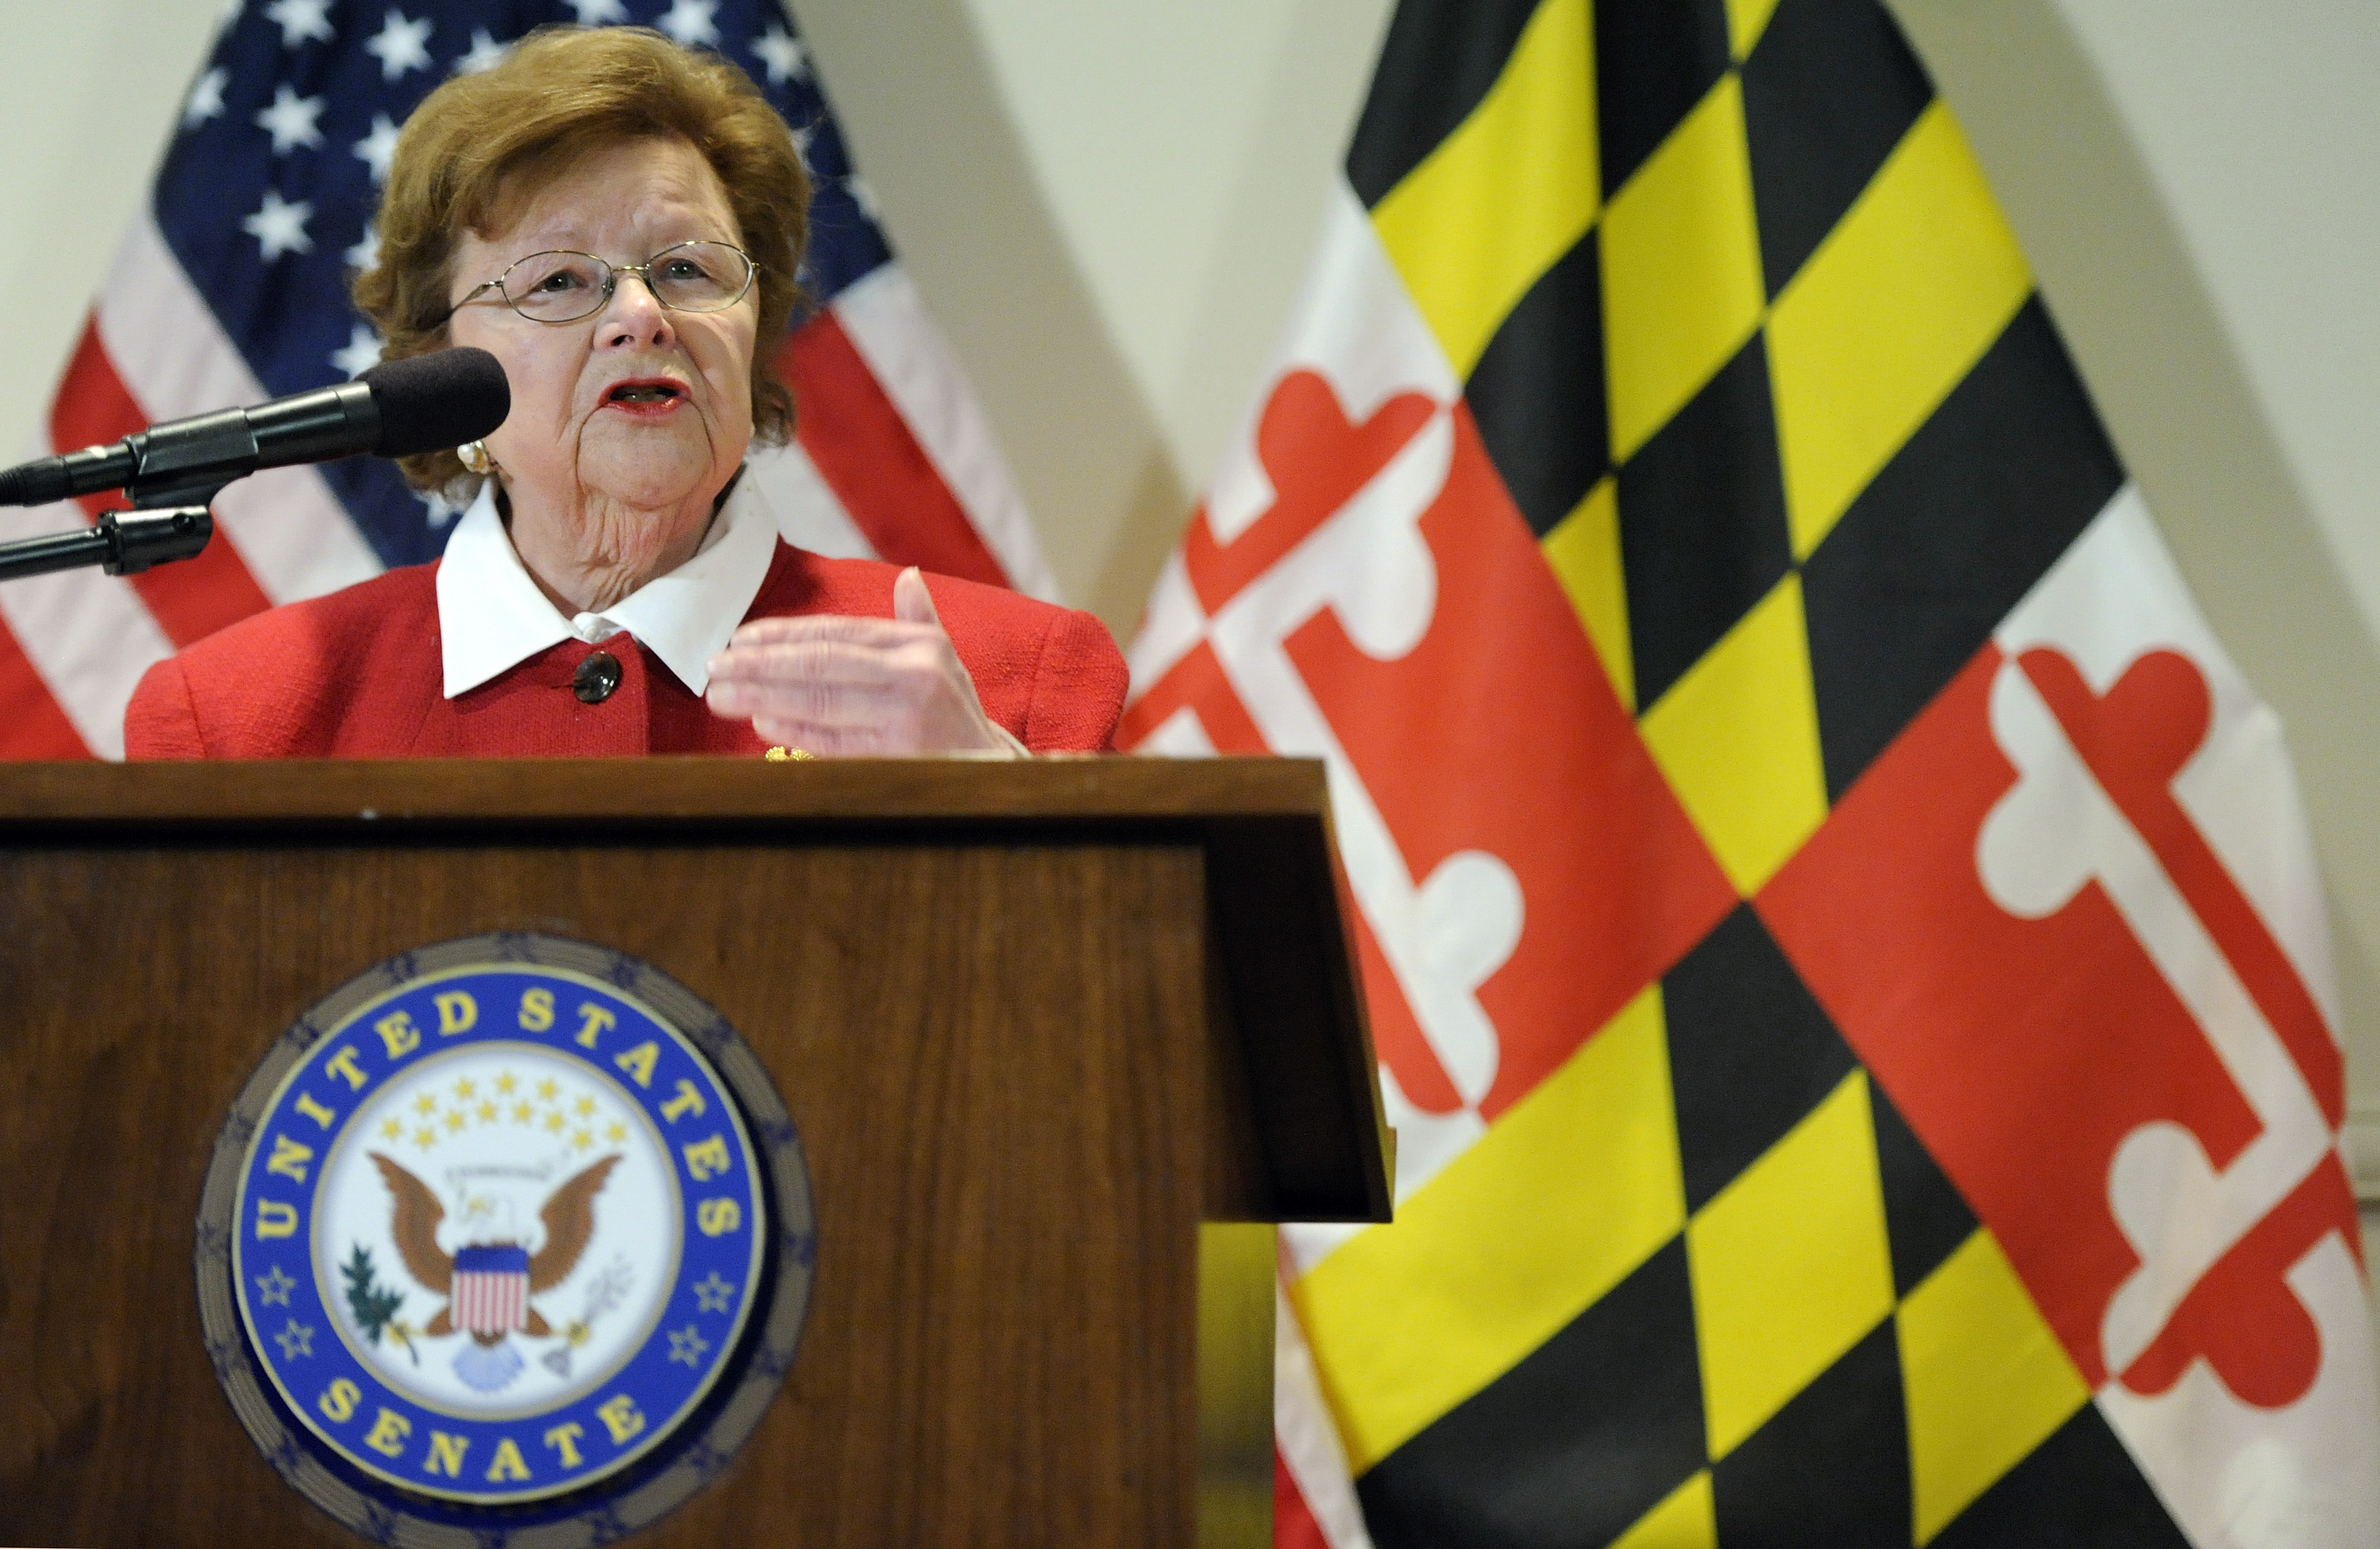 Sen. Barbara Mikulski, D-Md., the longest-serving woman in the history of Congress, speaks during a news conference announcing her retirement after her current term, in the Fells Point section of Baltimore on March 2, 2015.